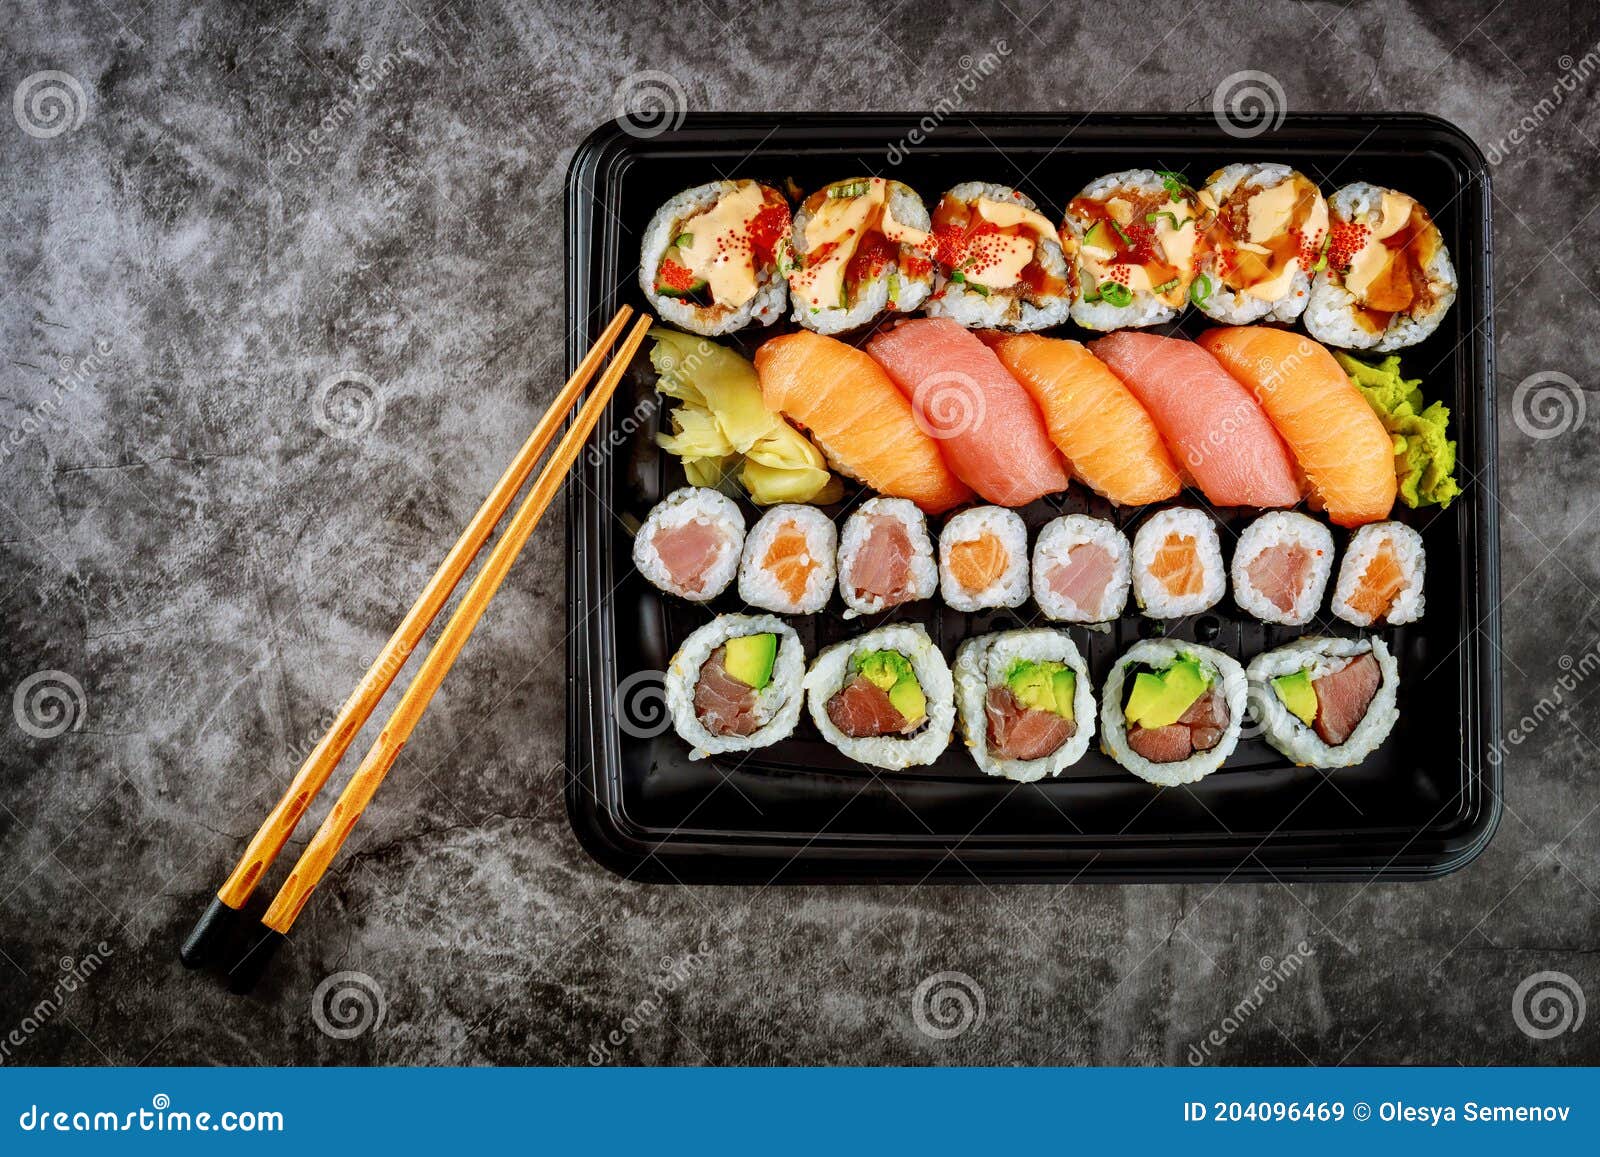 Assortment of Sushi Roll Set on a Black Tray. Japanese Food Stock